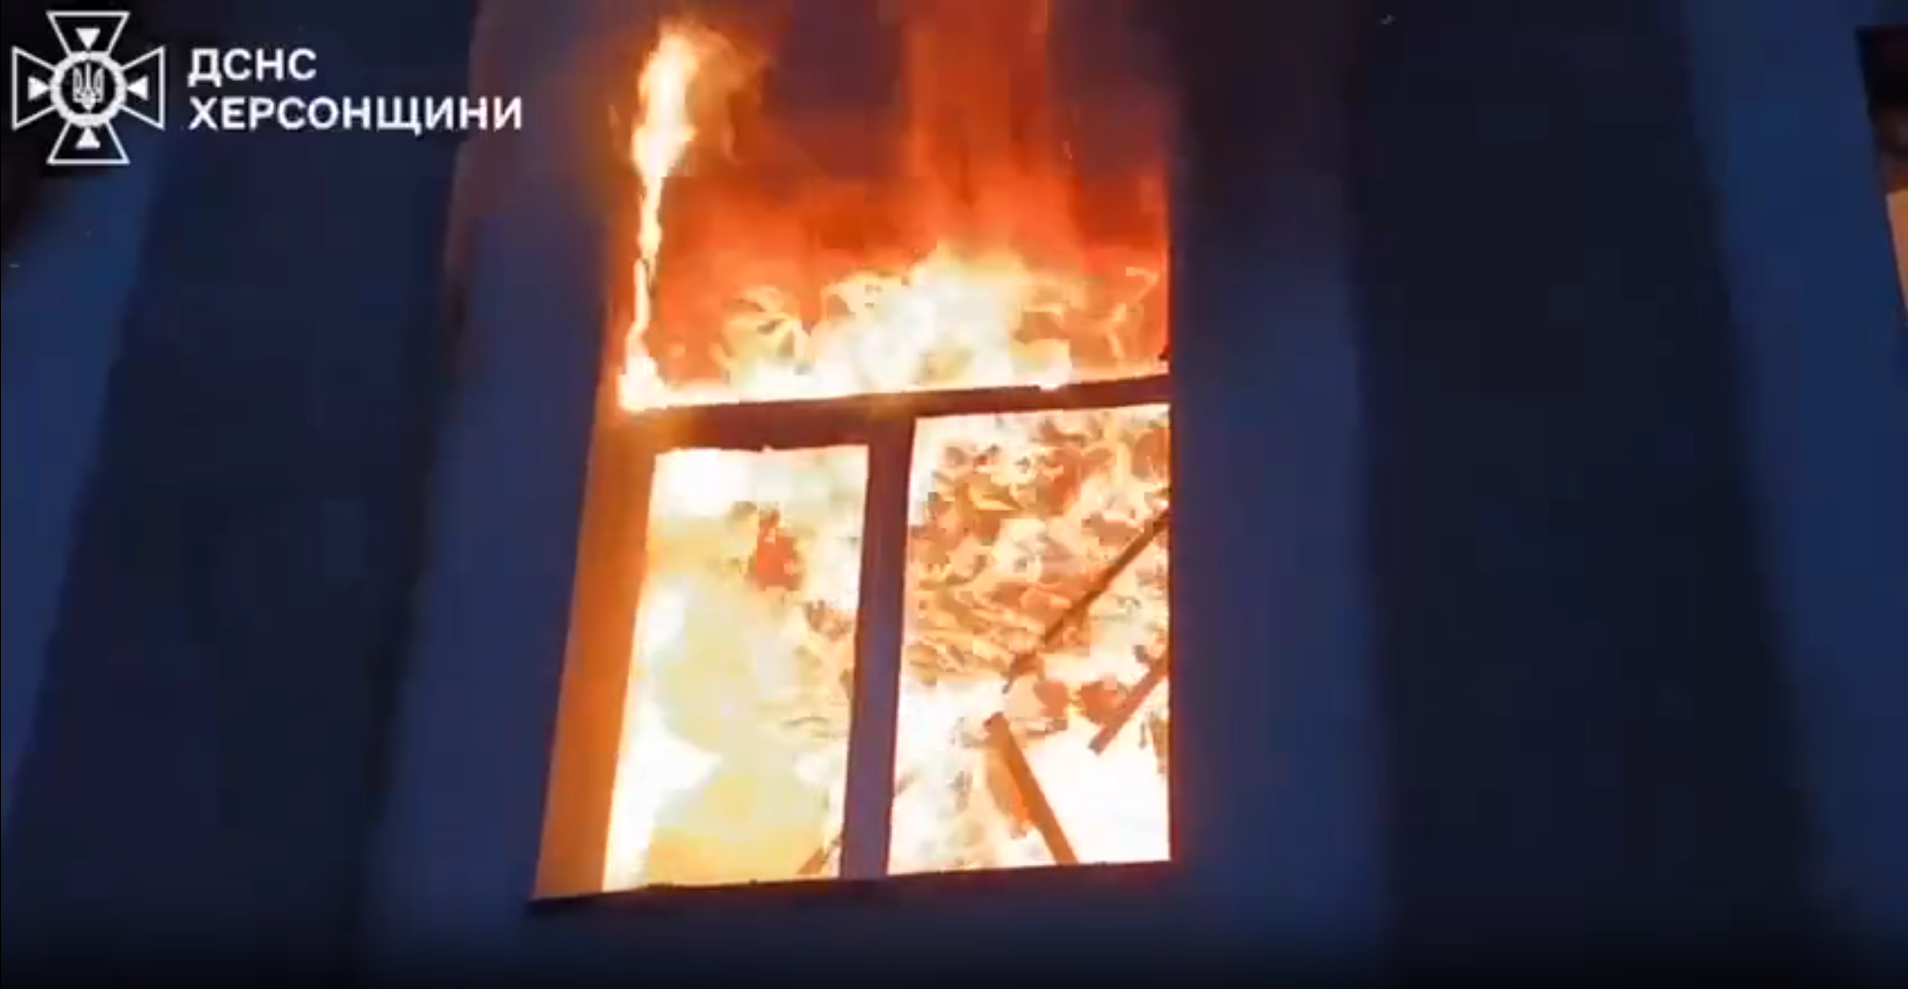 Rescue Workers Hit by Repeat Shelling in Kherson.